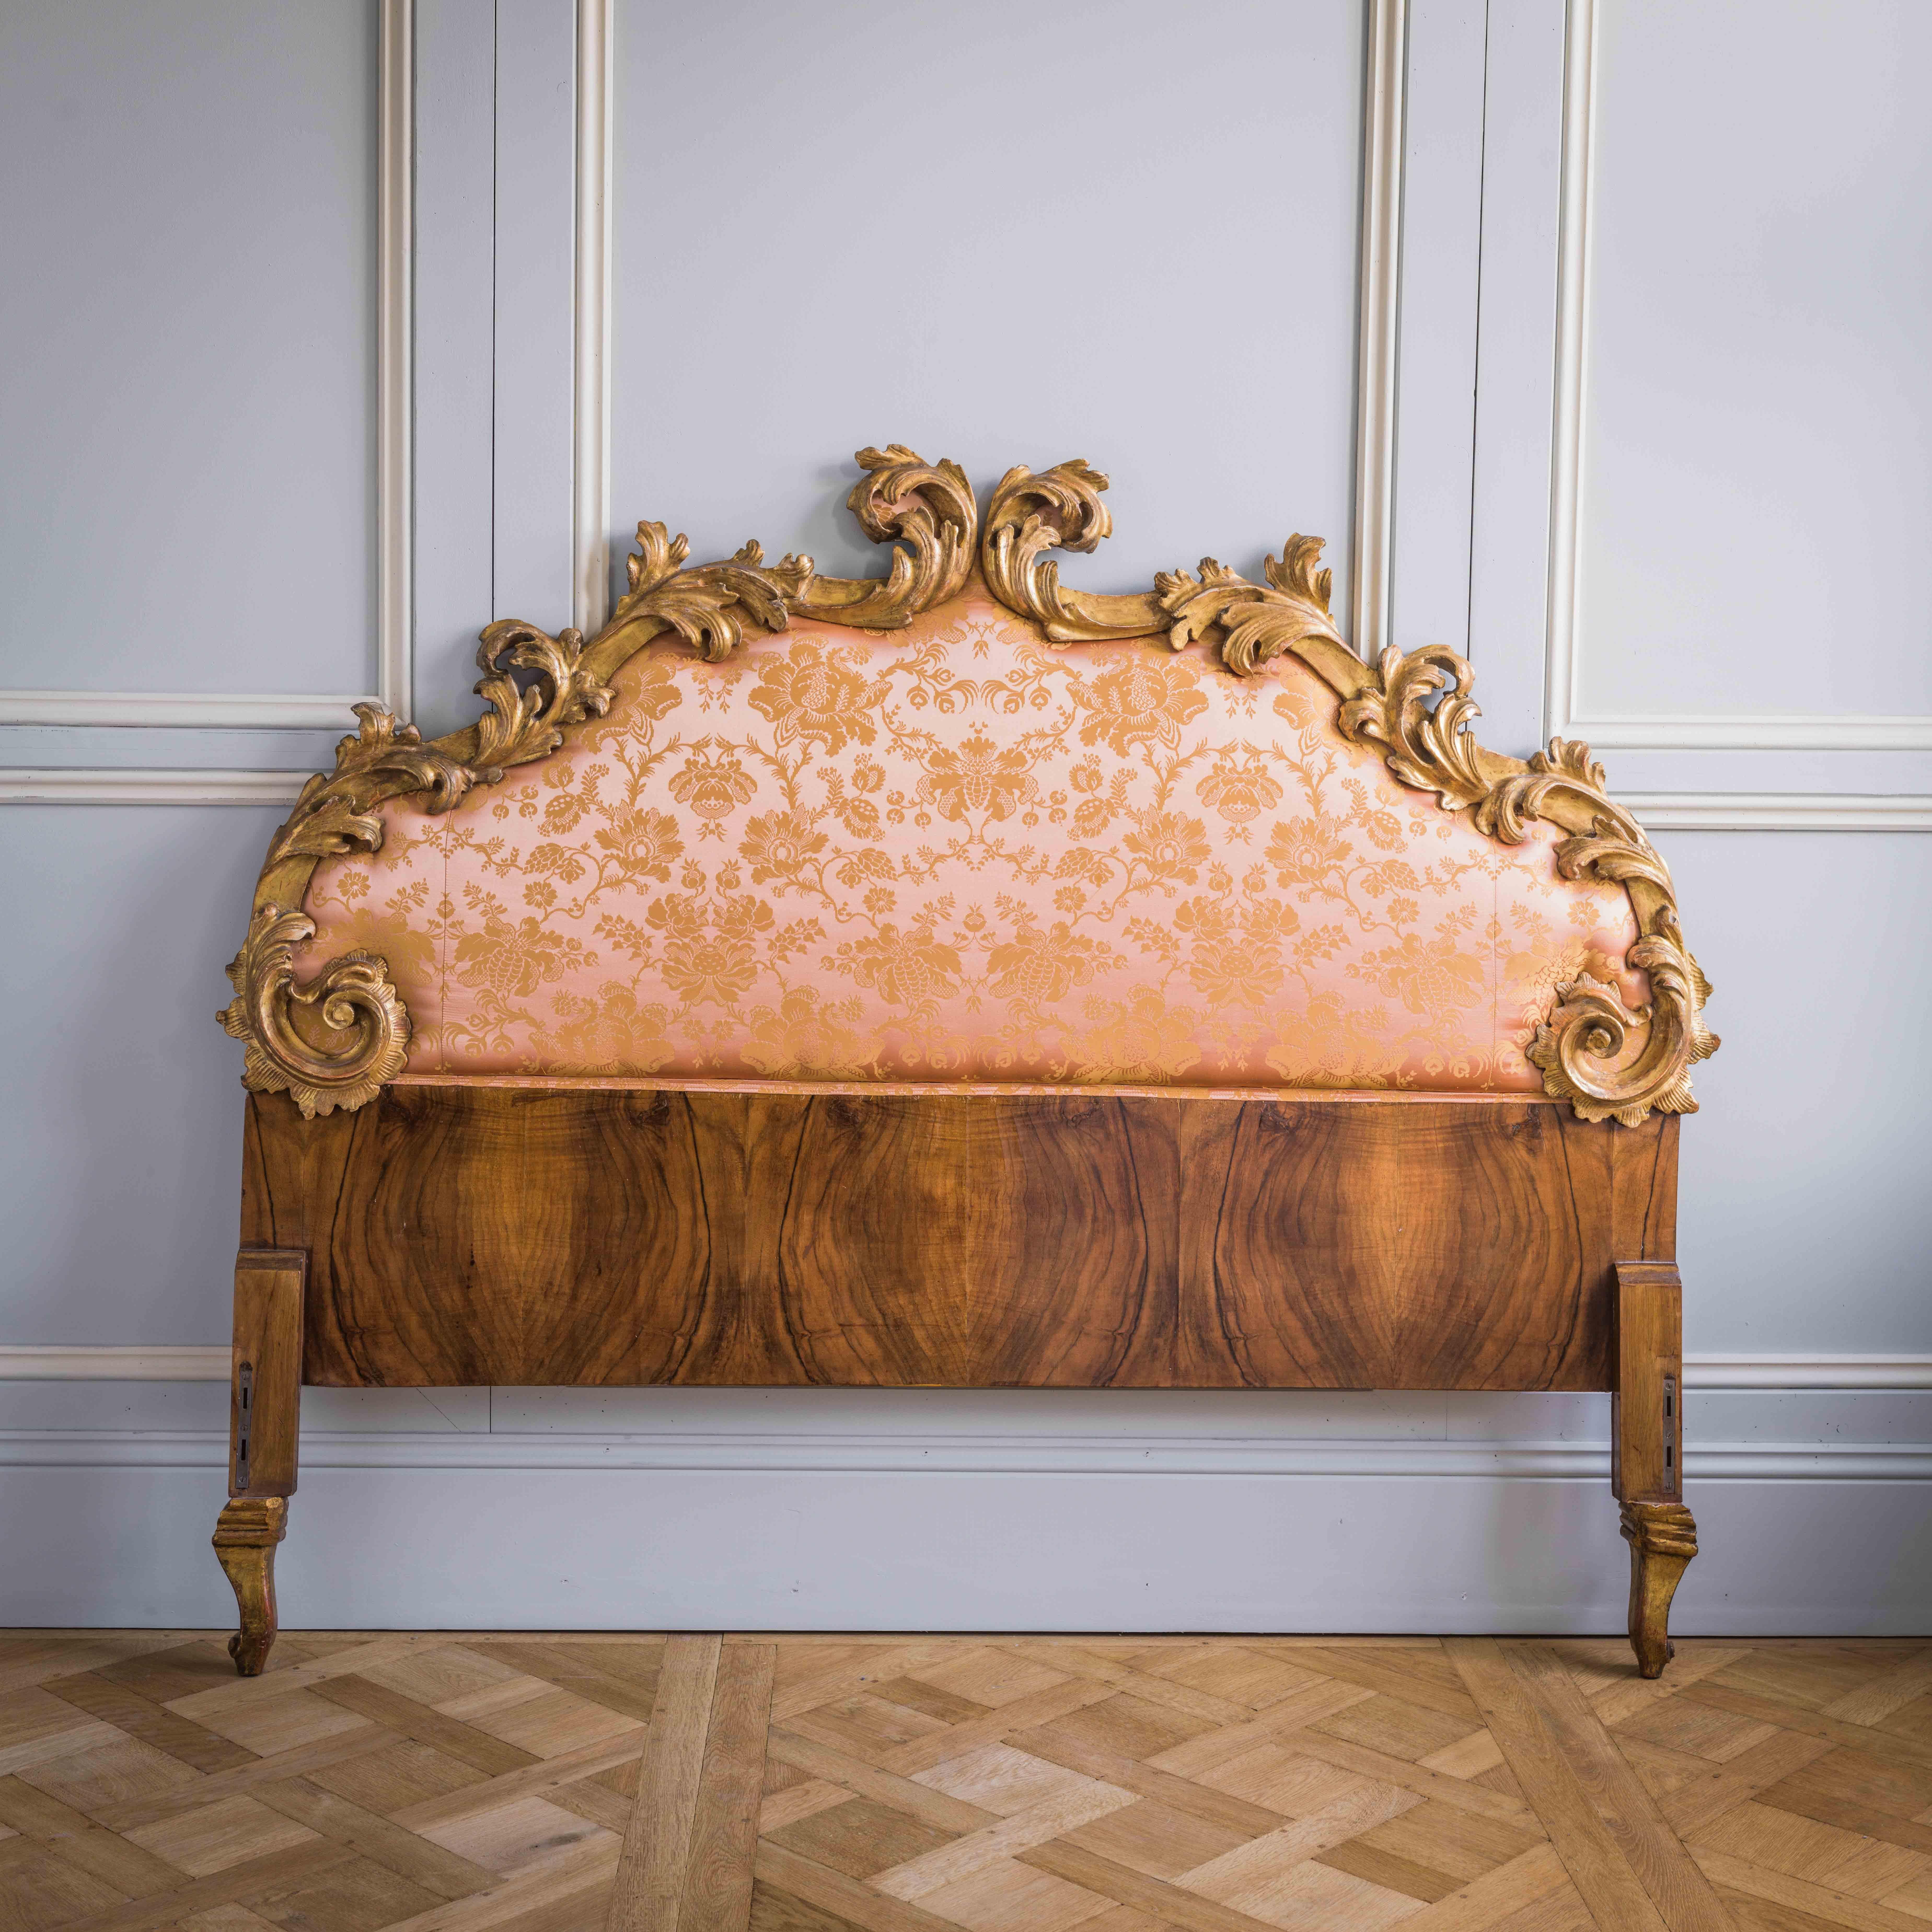 A late 19th century, Italian, Rococo style headboard featuring deeply scrolled, hand carved, acanthus leaves which reflect the warmth and brightness of their original water gilding with the addition of an overall naturally time aged patina. The